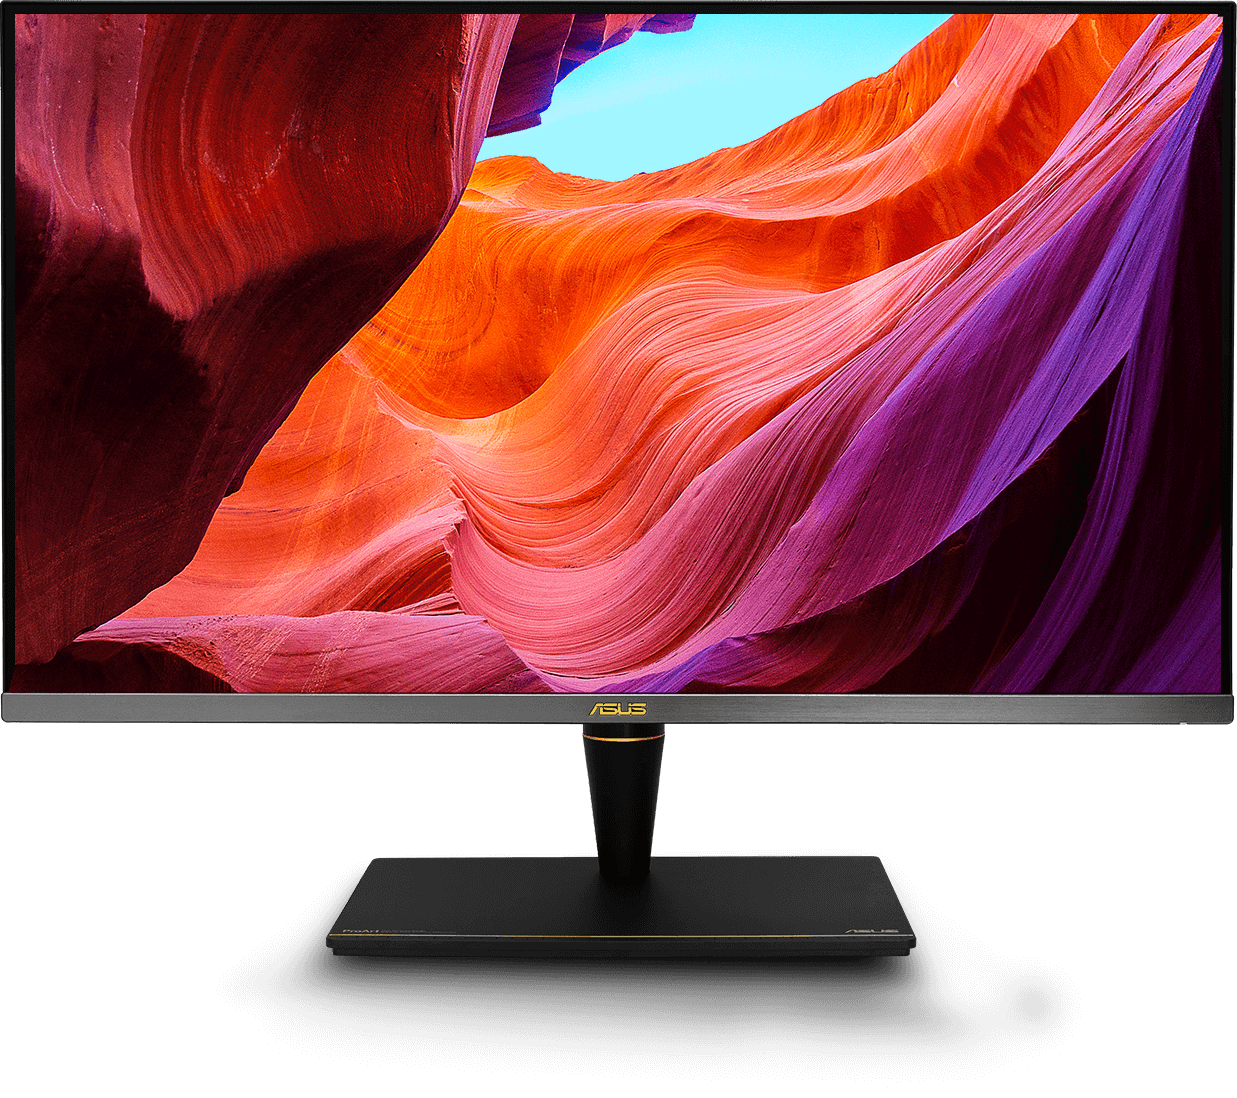 ASUS ProArt Display PA32UCX-PK with color fidelity for truly expressive hues